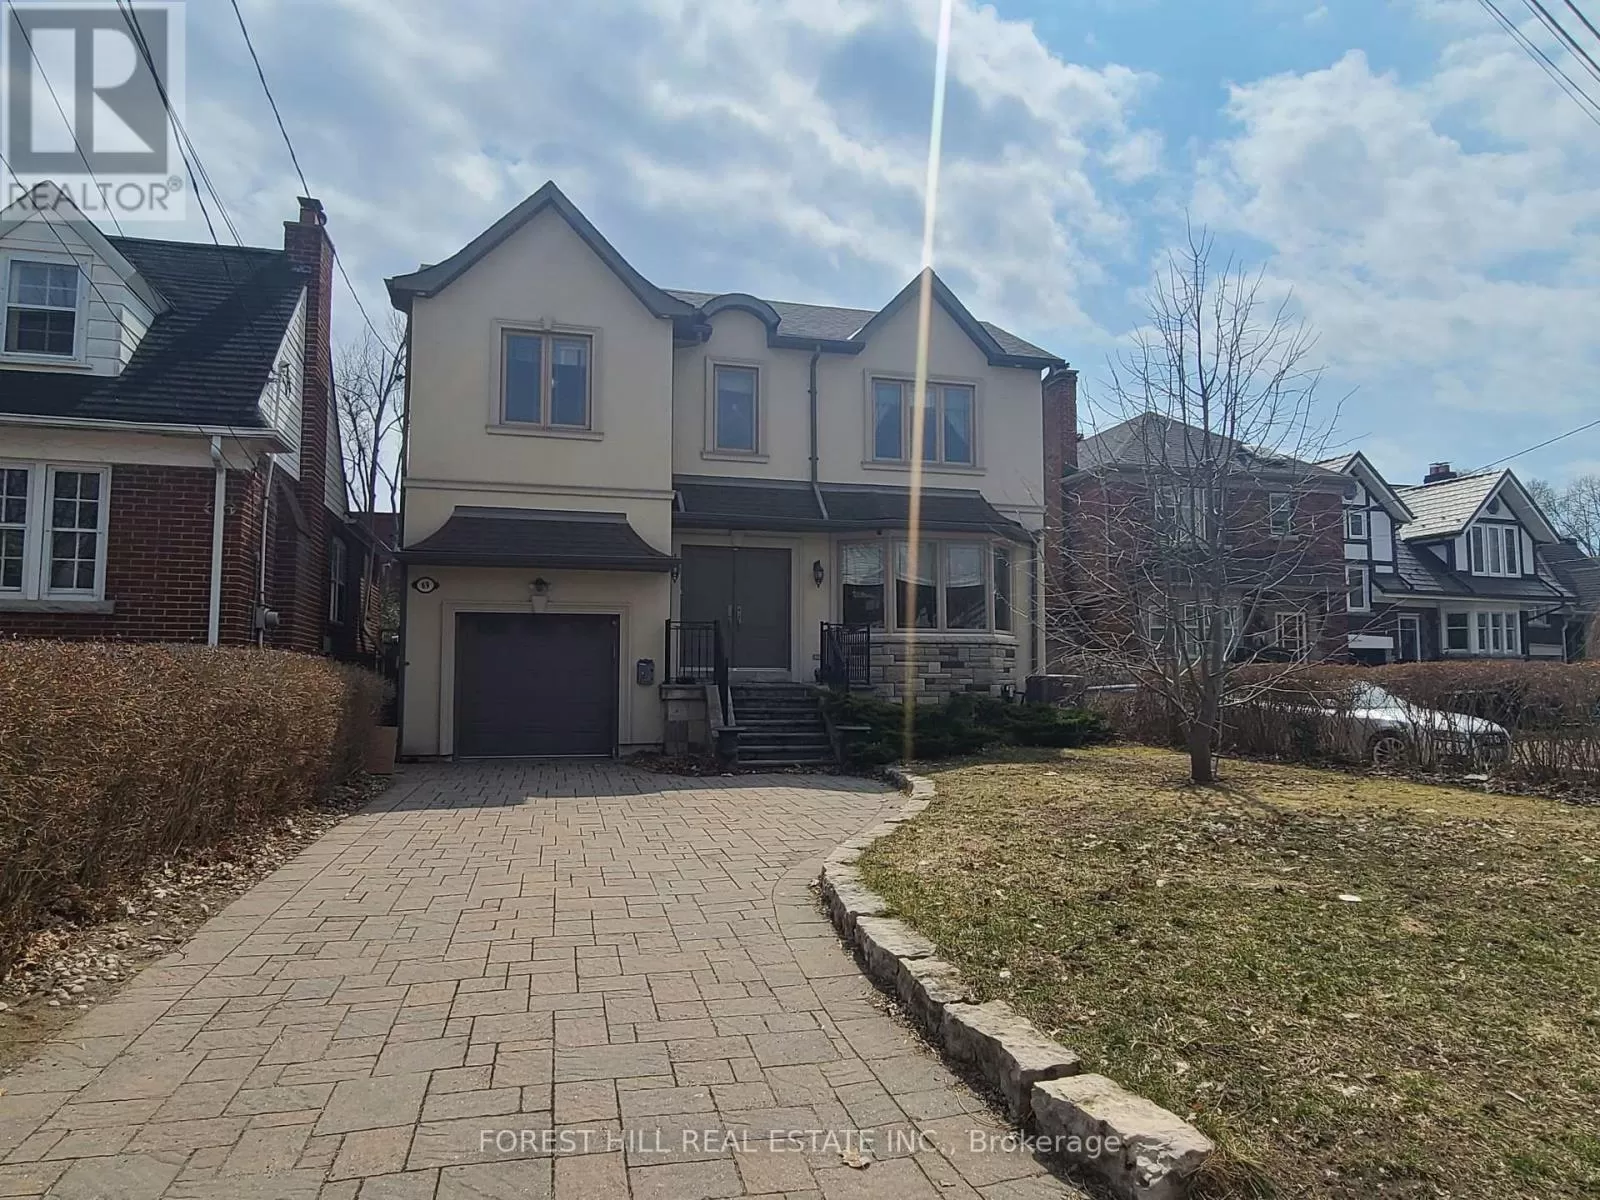 House for rent: 69 Don Valley Drive, Toronto, Ontario M4K 2J1